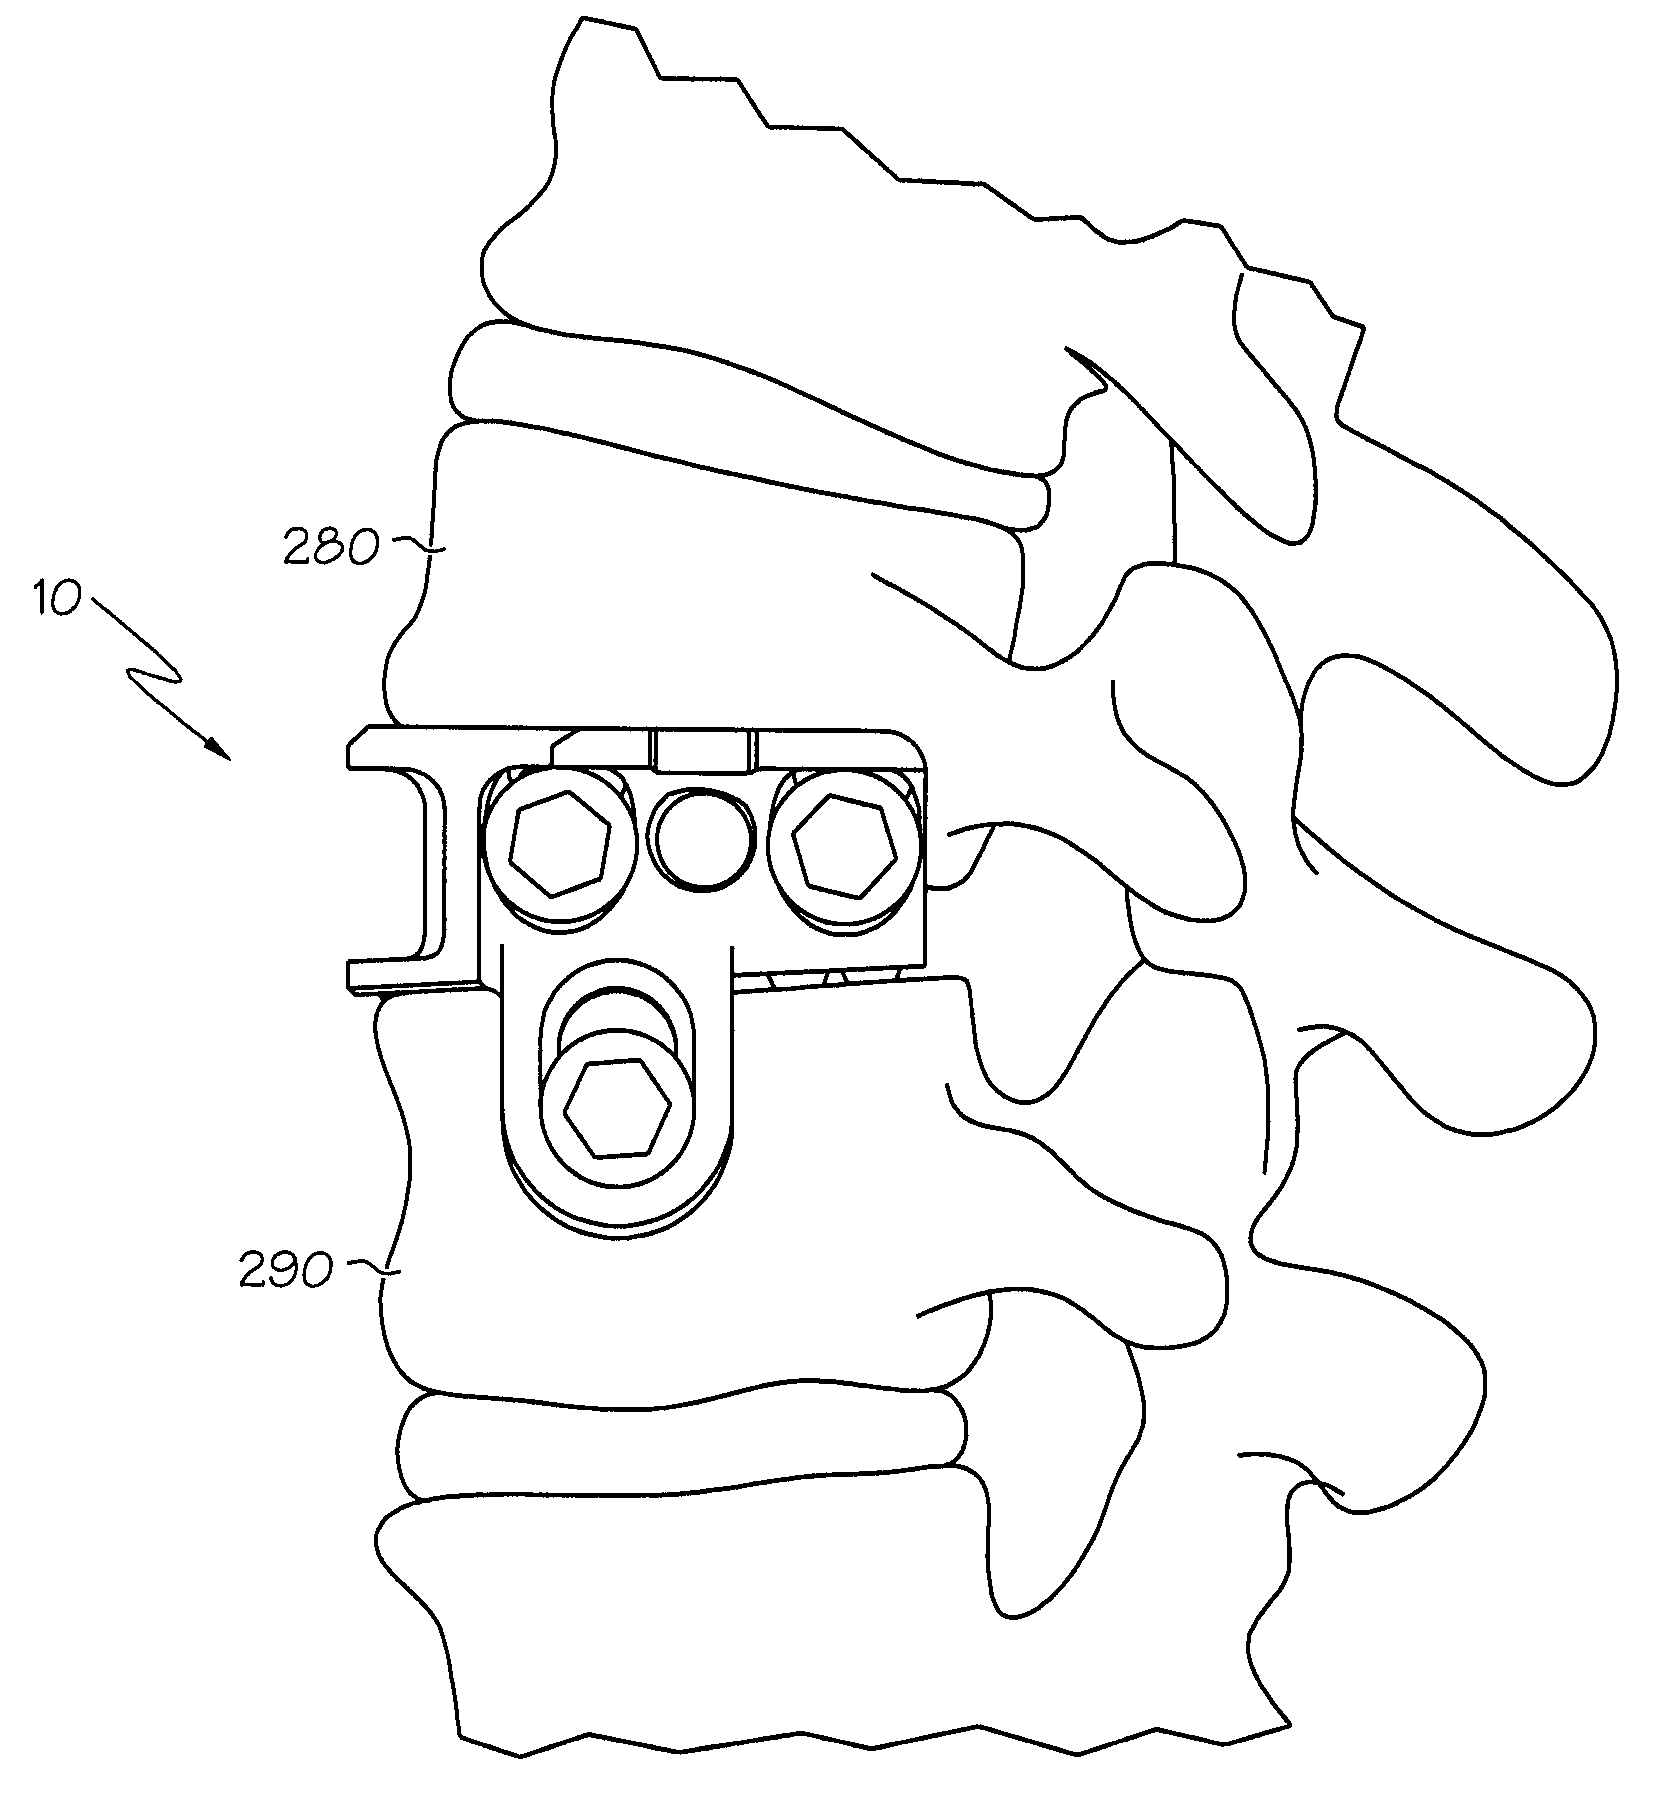 Lateral mount implant device